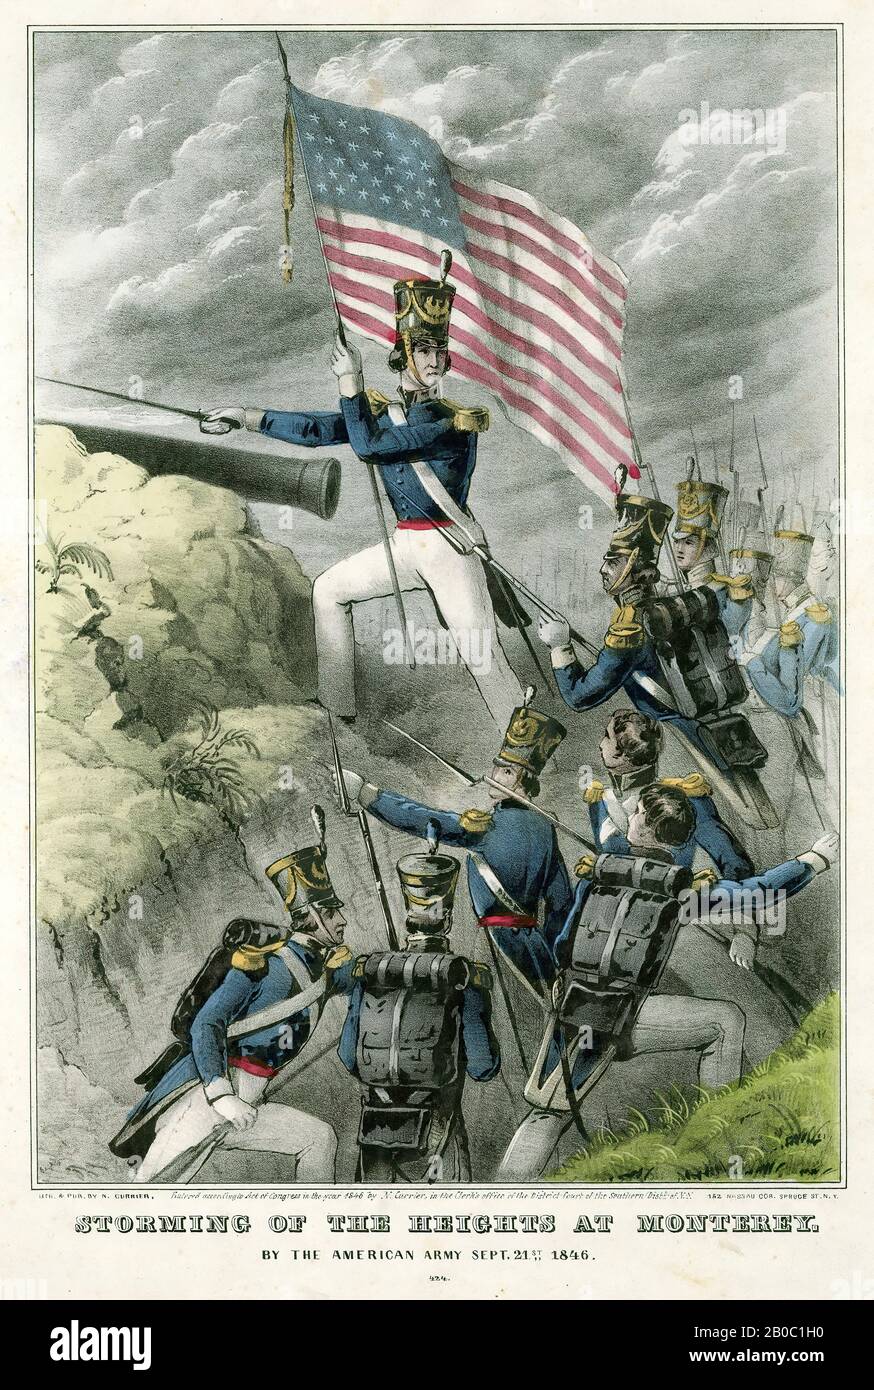 Unknown Artist, Part of a Collection of Mexican-American War Prints, Storming of the Heigts of Monterey by the American army September 21st 1846 #424, 1846, color lithograph on paper, 18 1/4 in. x 13 7/16 in. (46.36 cm x 34.13 cm Stock Photo